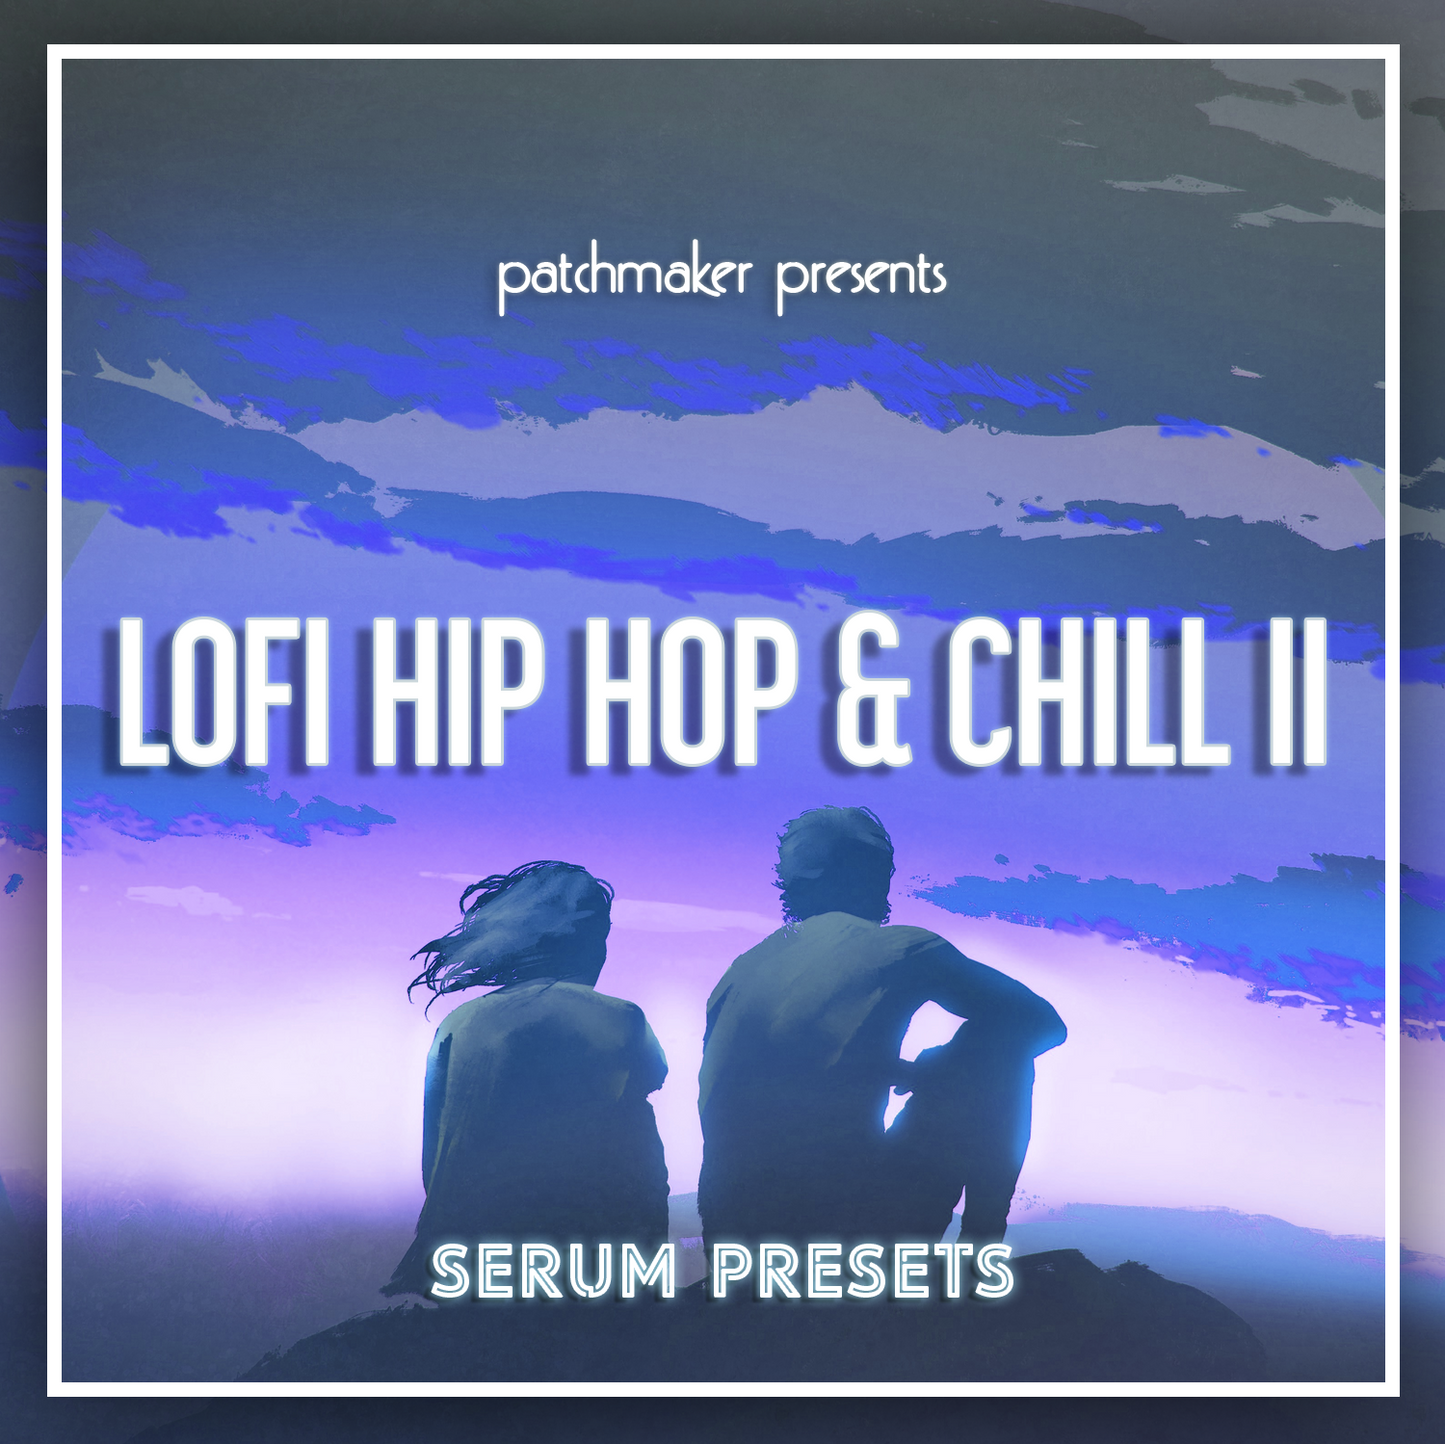 LO-FI Hip-Hop & Chill II for Serum